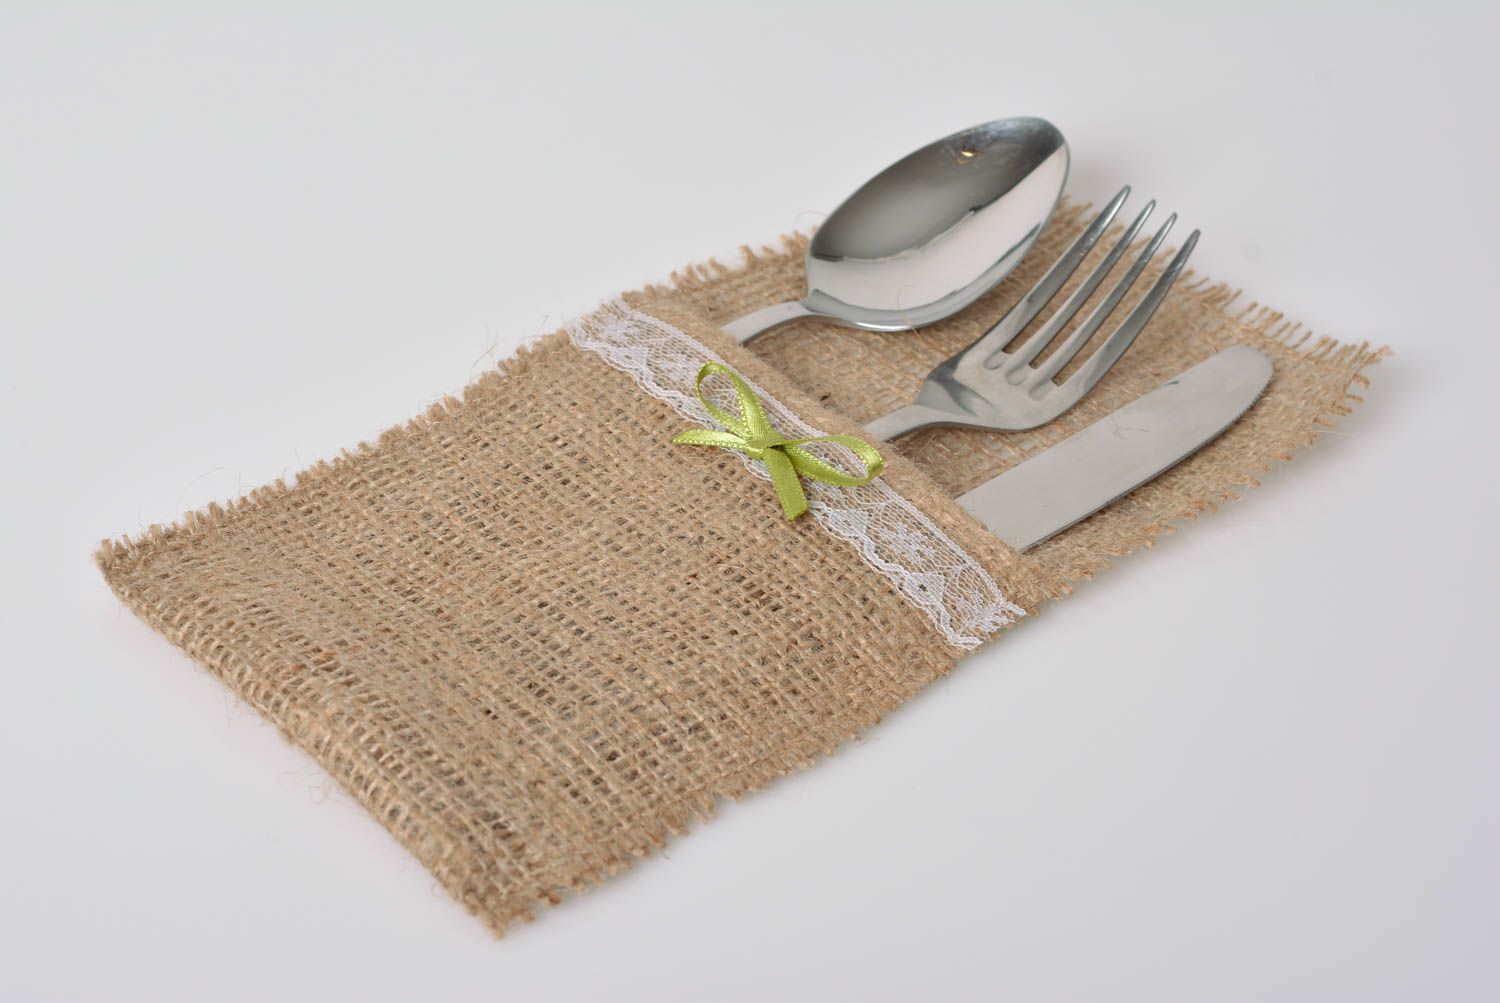 Case for cutlery made of burlap for casual or festive table handmade home decor photo 1